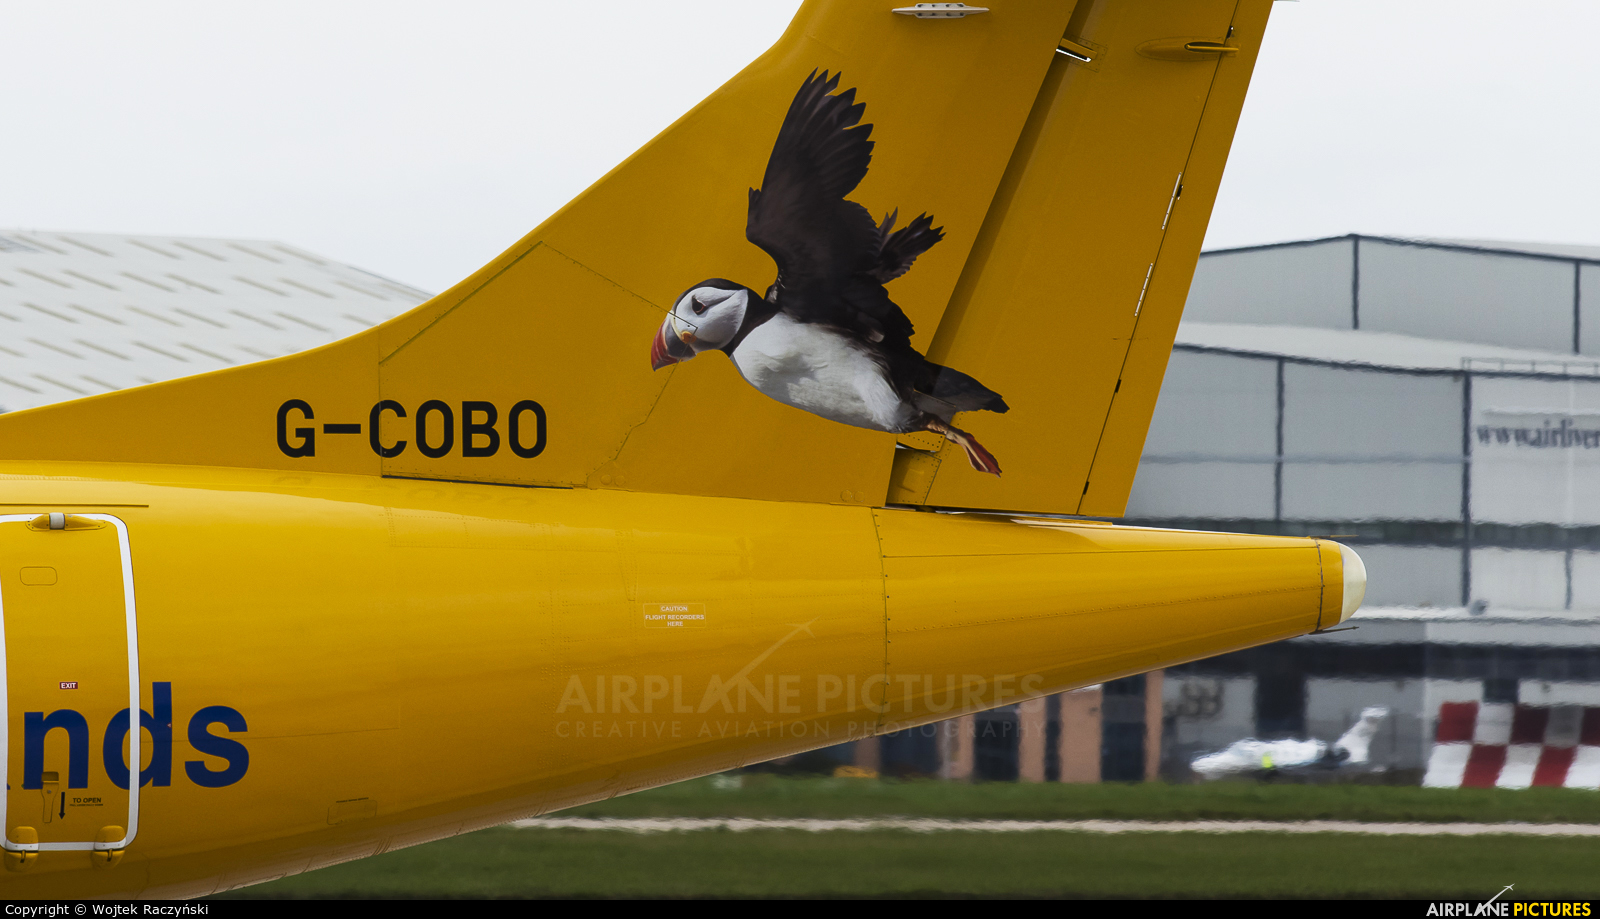 Aurigny Air Services G-COBO aircraft at Manchester